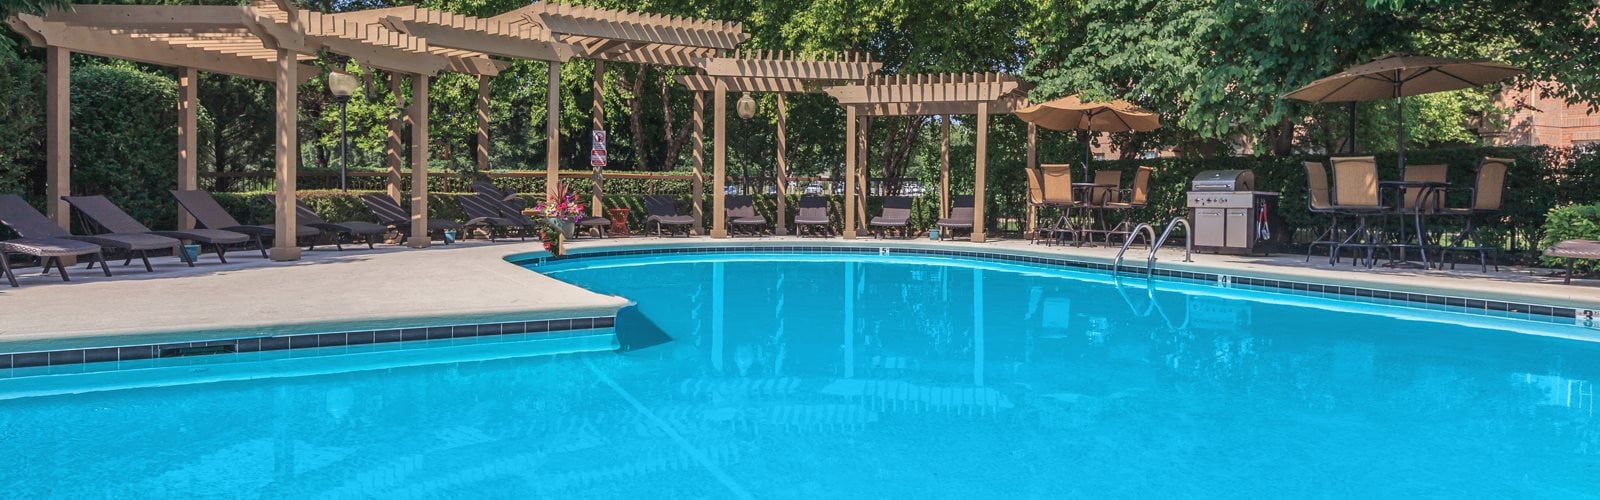 Invigorating Swimming Pool at Crowne Chase Apartment Homes, Overland Park